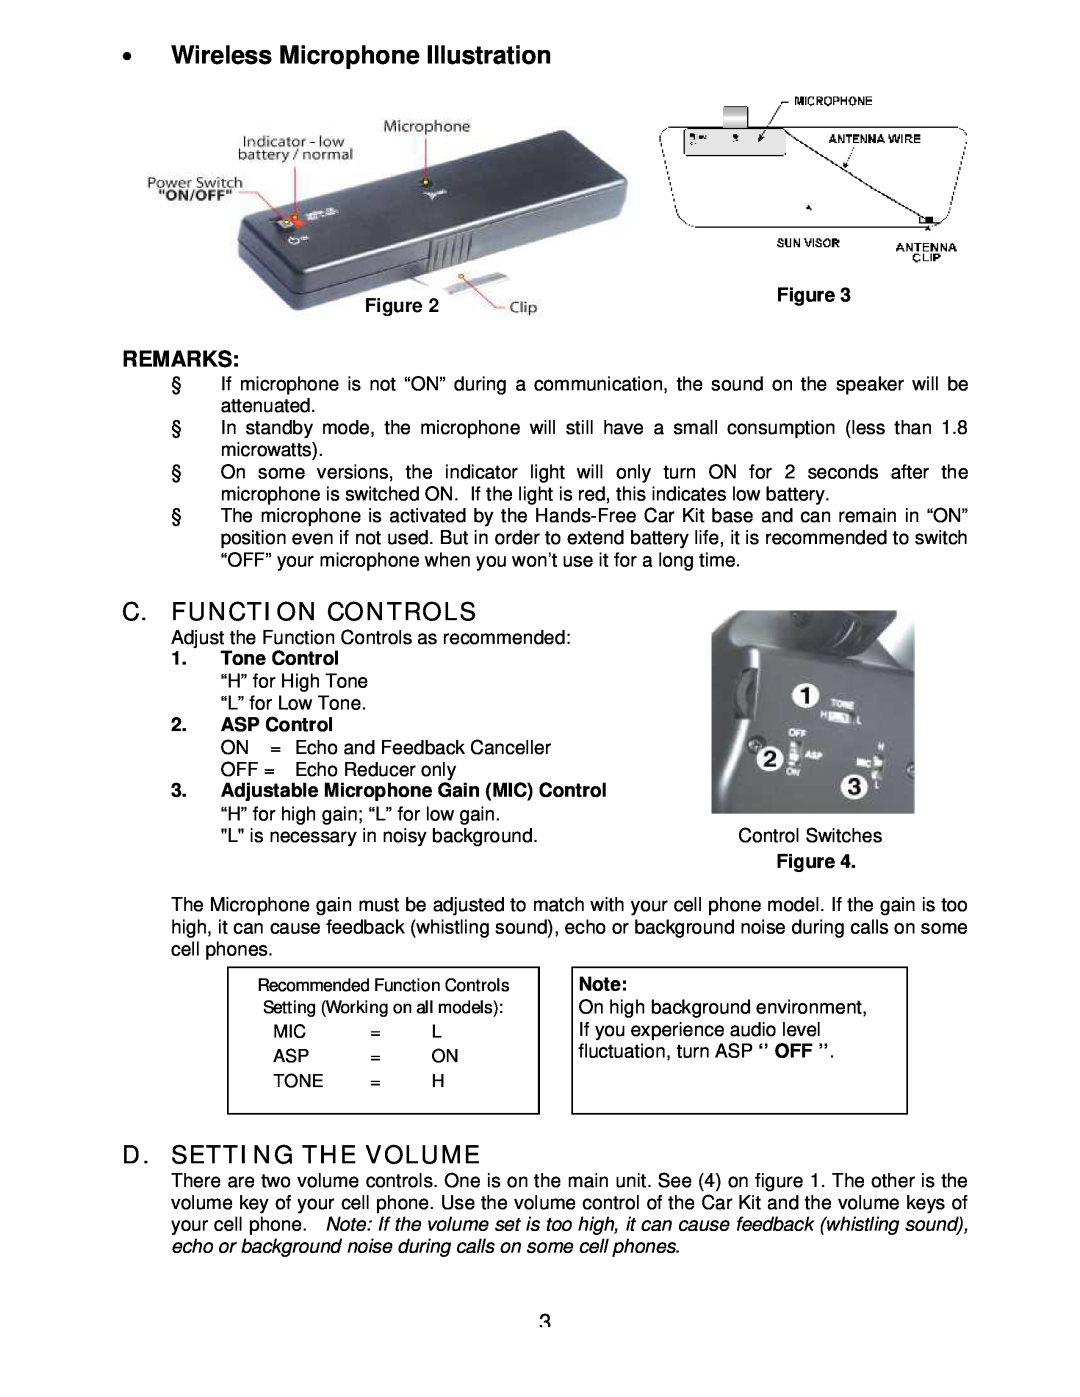 Sony headphone manual ∙Wireless Microphone Illustration, C.Function Controls, D. Setting The Volume, Remarks 